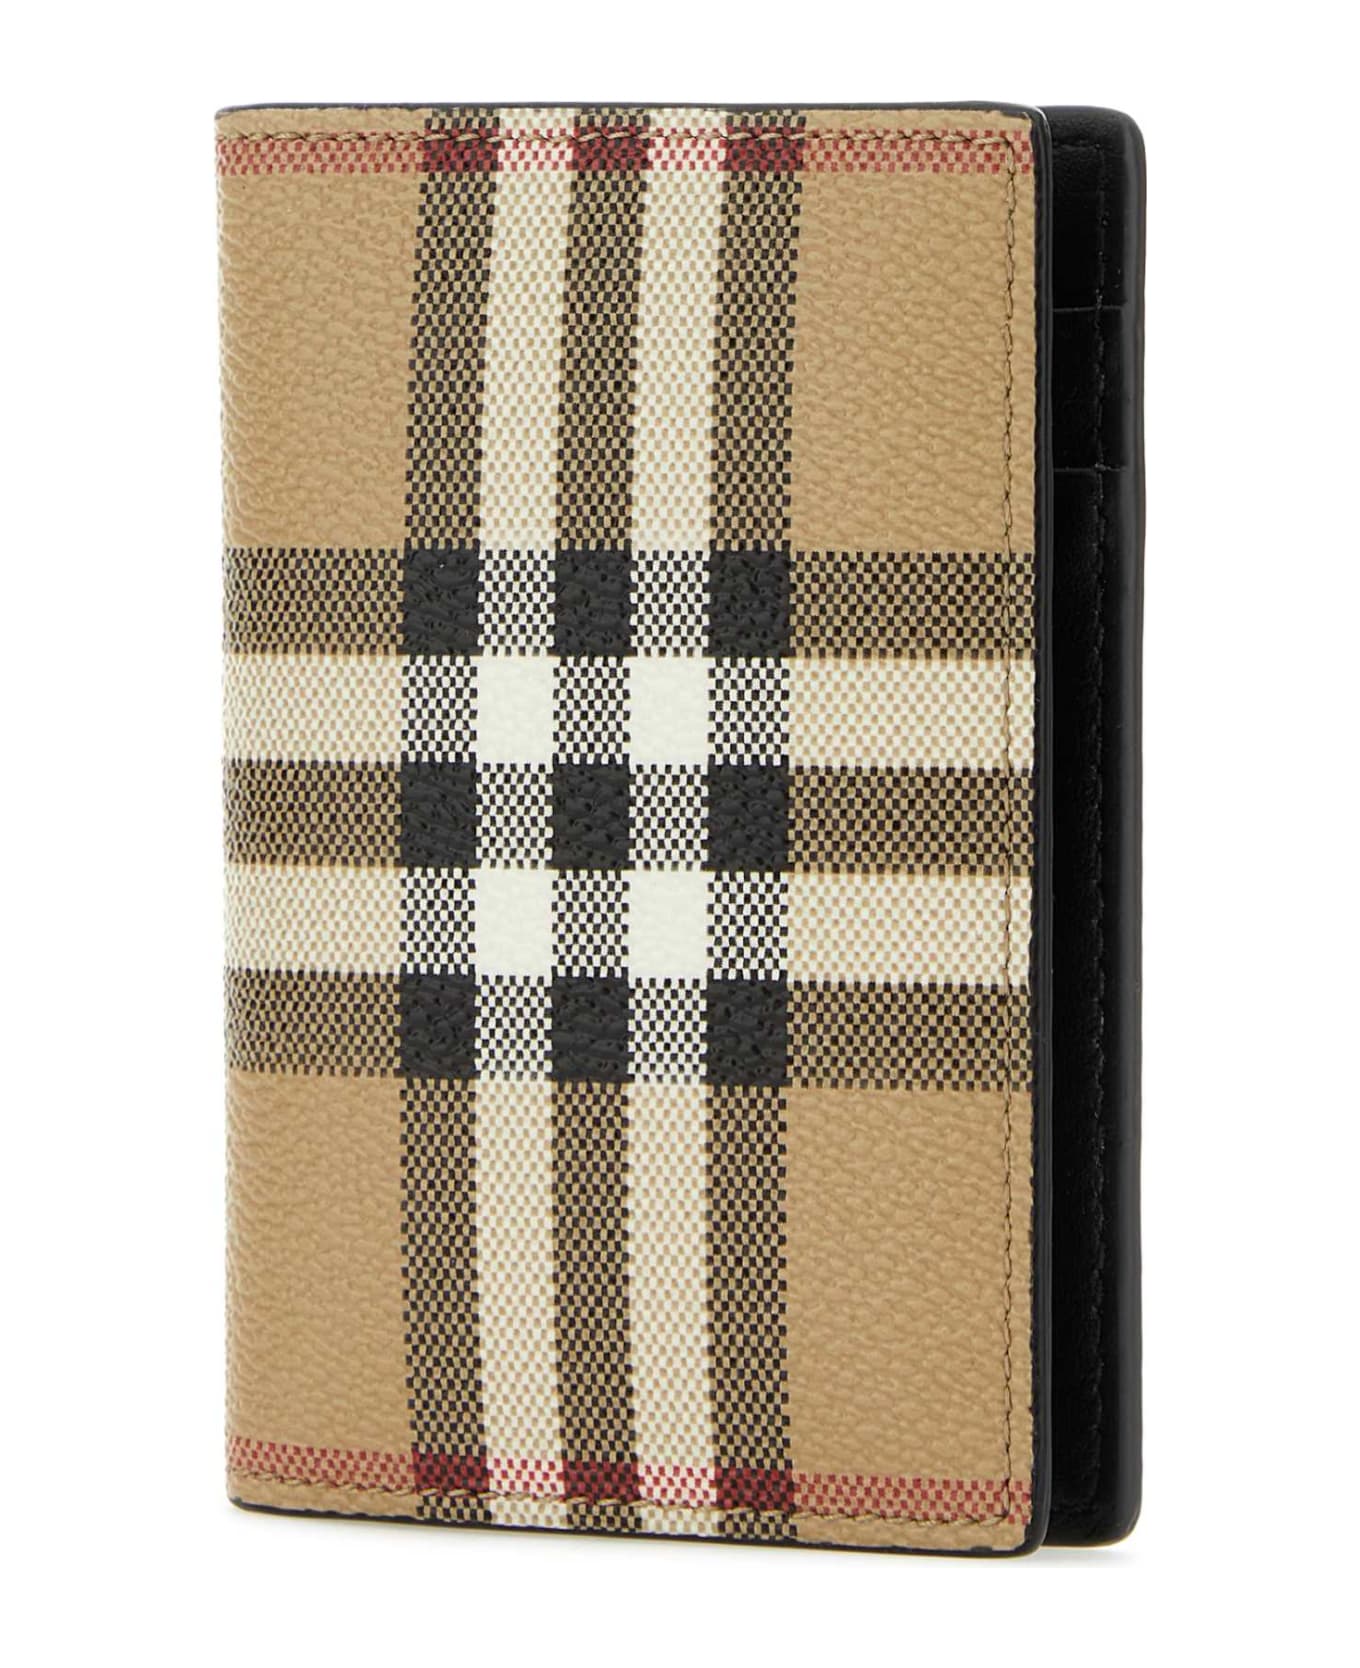 Burberry Printed Canvas Cardholder - ARCHIVEBEIGE